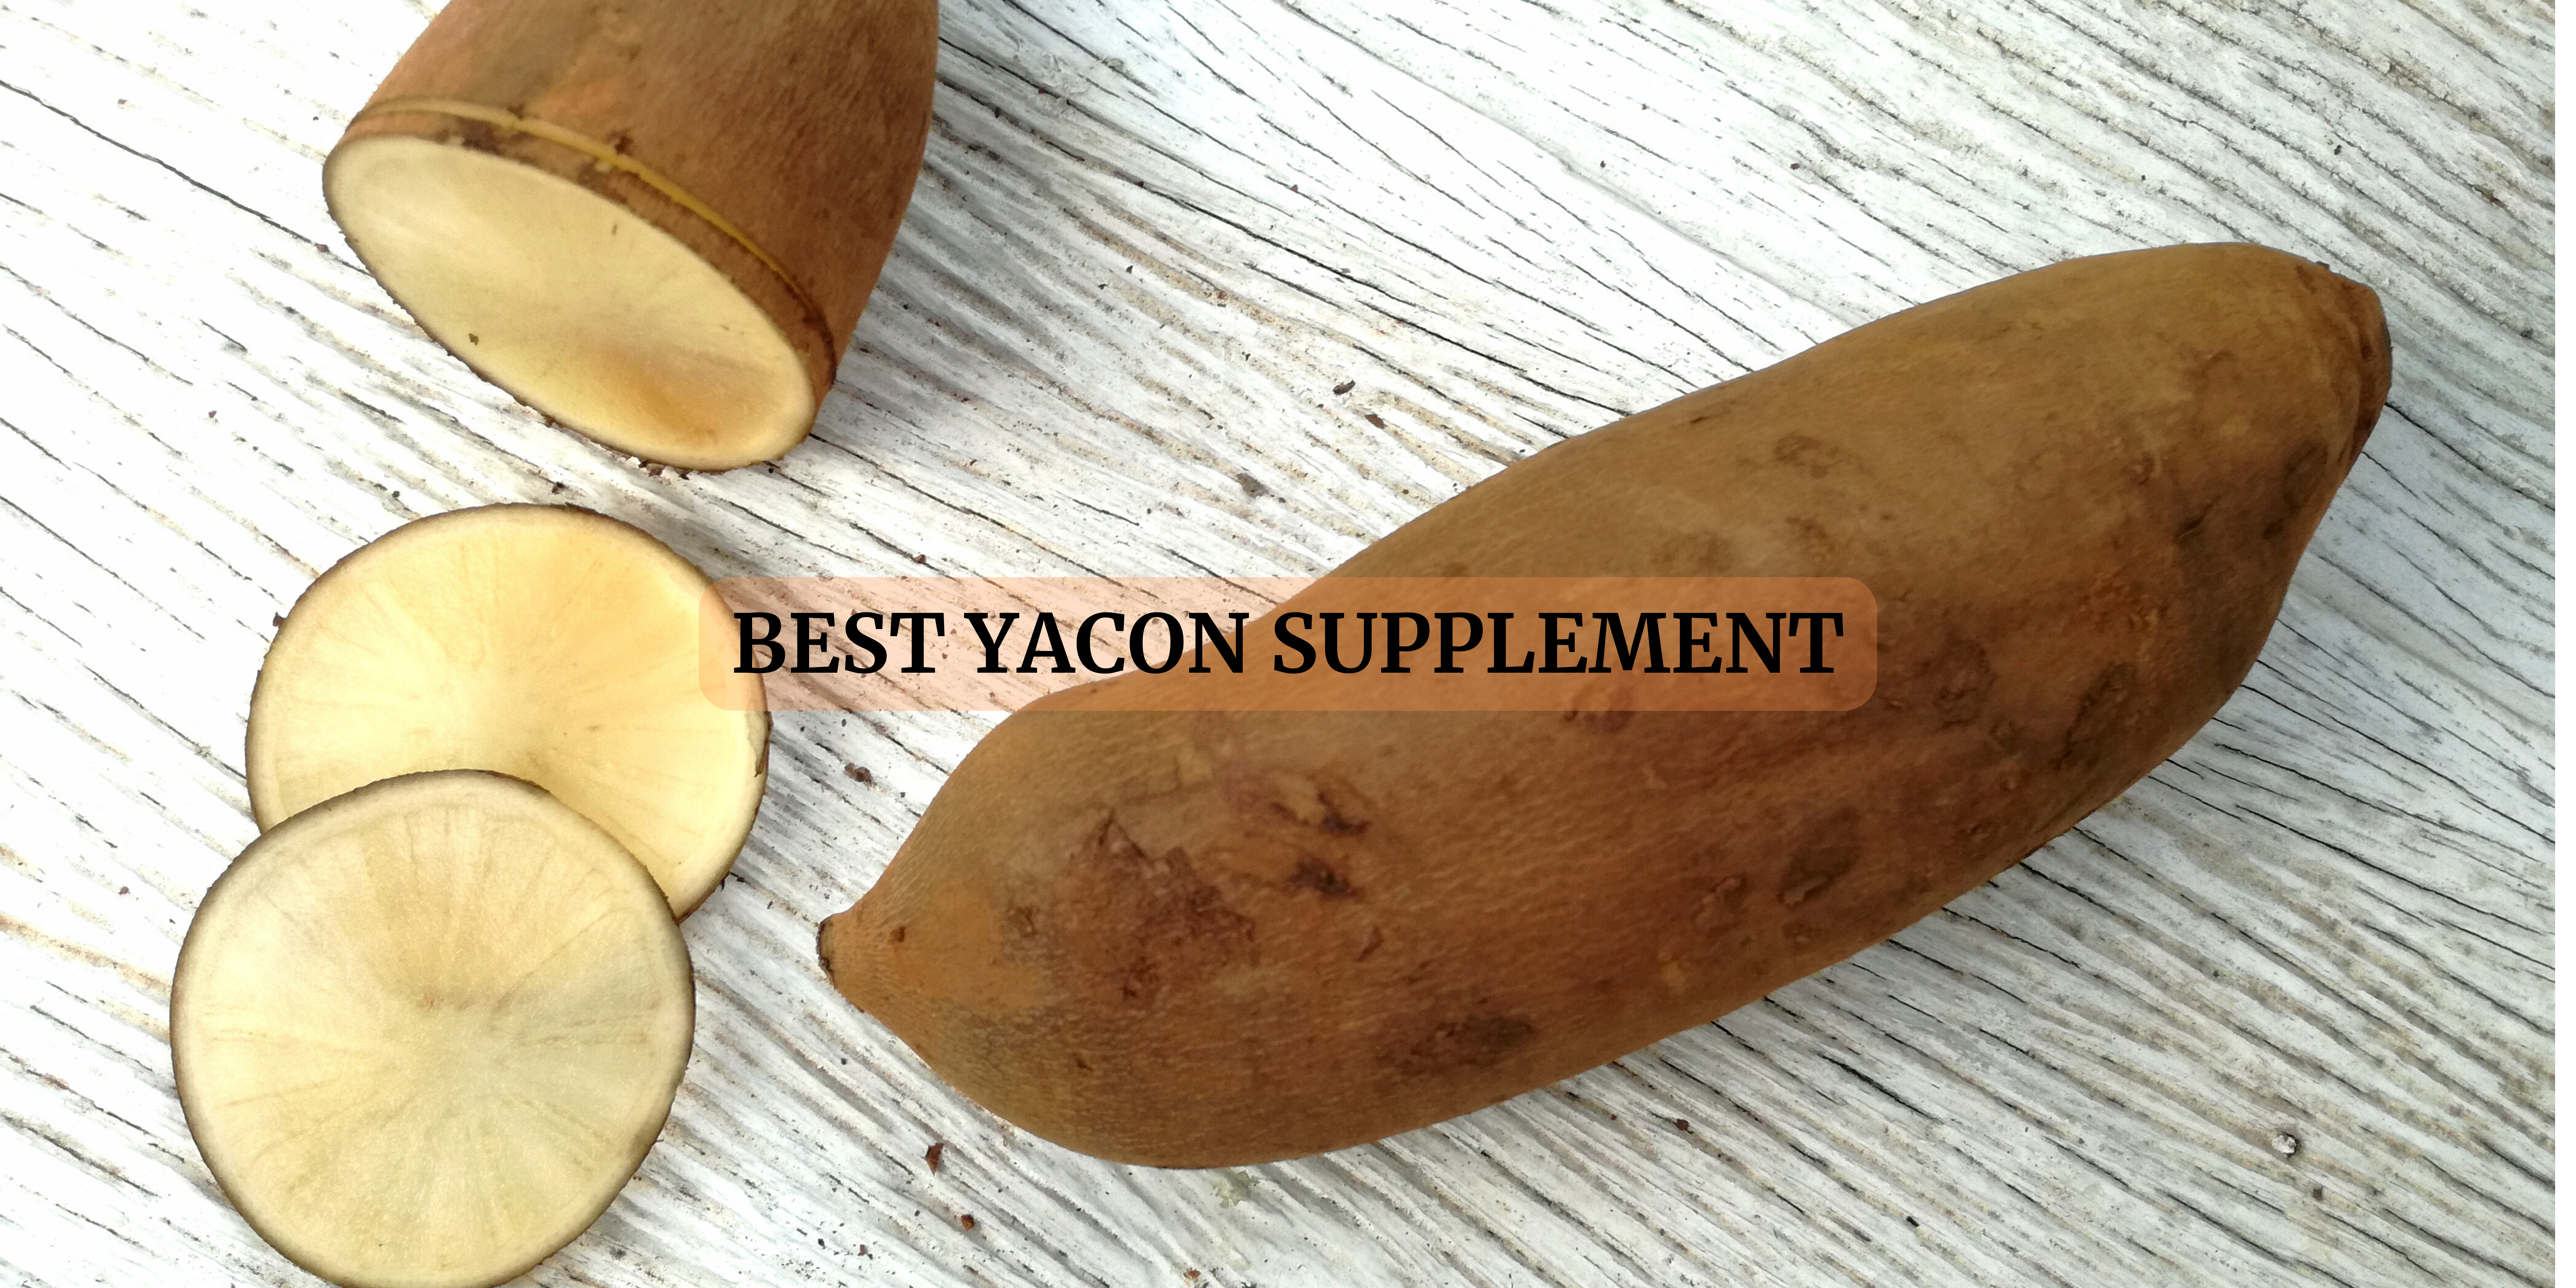 Yacon Supplements in Japan